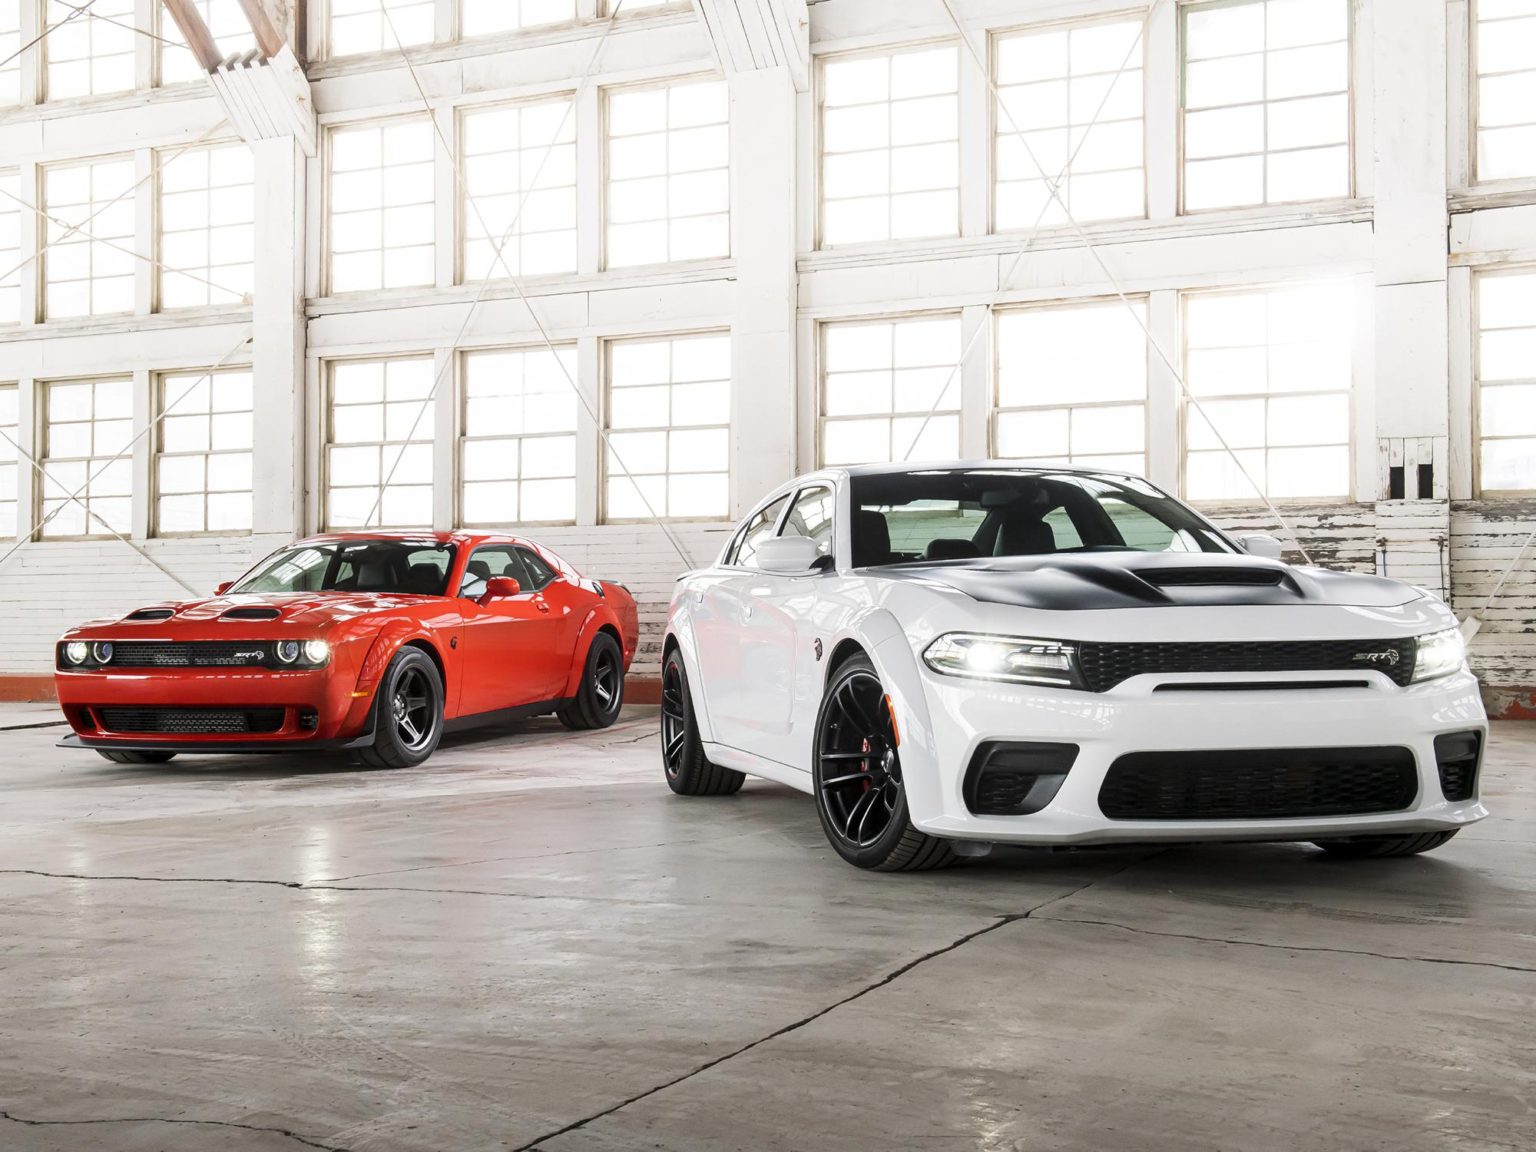 Existing Dodge Charger and Challenger models are getting a no-cost update designed to thwart thieves.